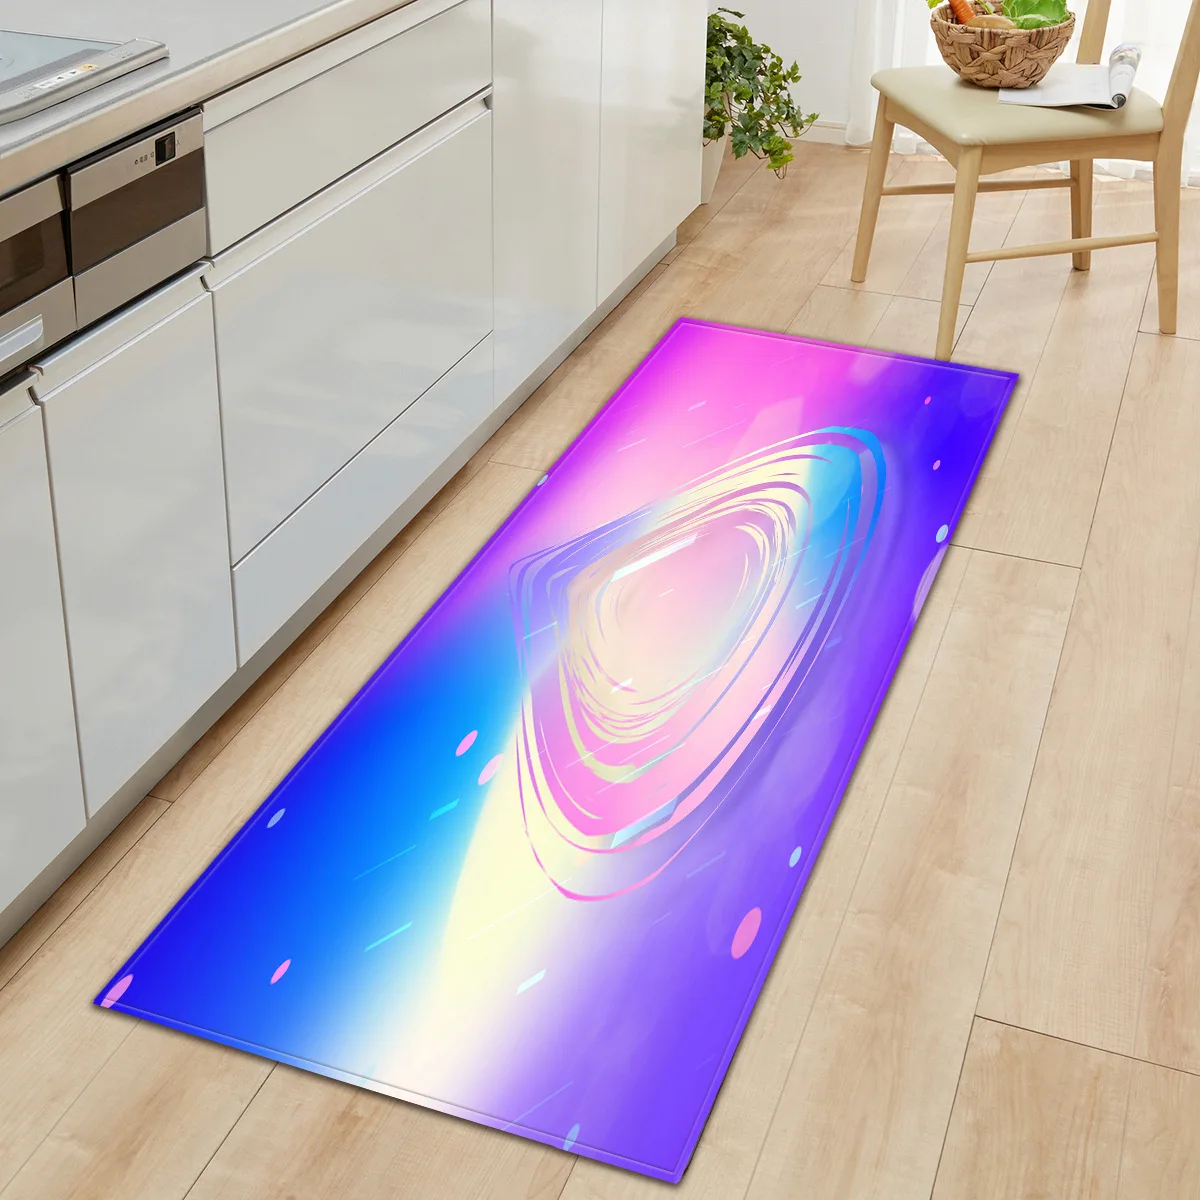 Colorful Universe Galaxy Whale Pattern Printed Rectangular Felt Rugs Bedroom Rugs All Kitchen and Home Decorations Floor Mats